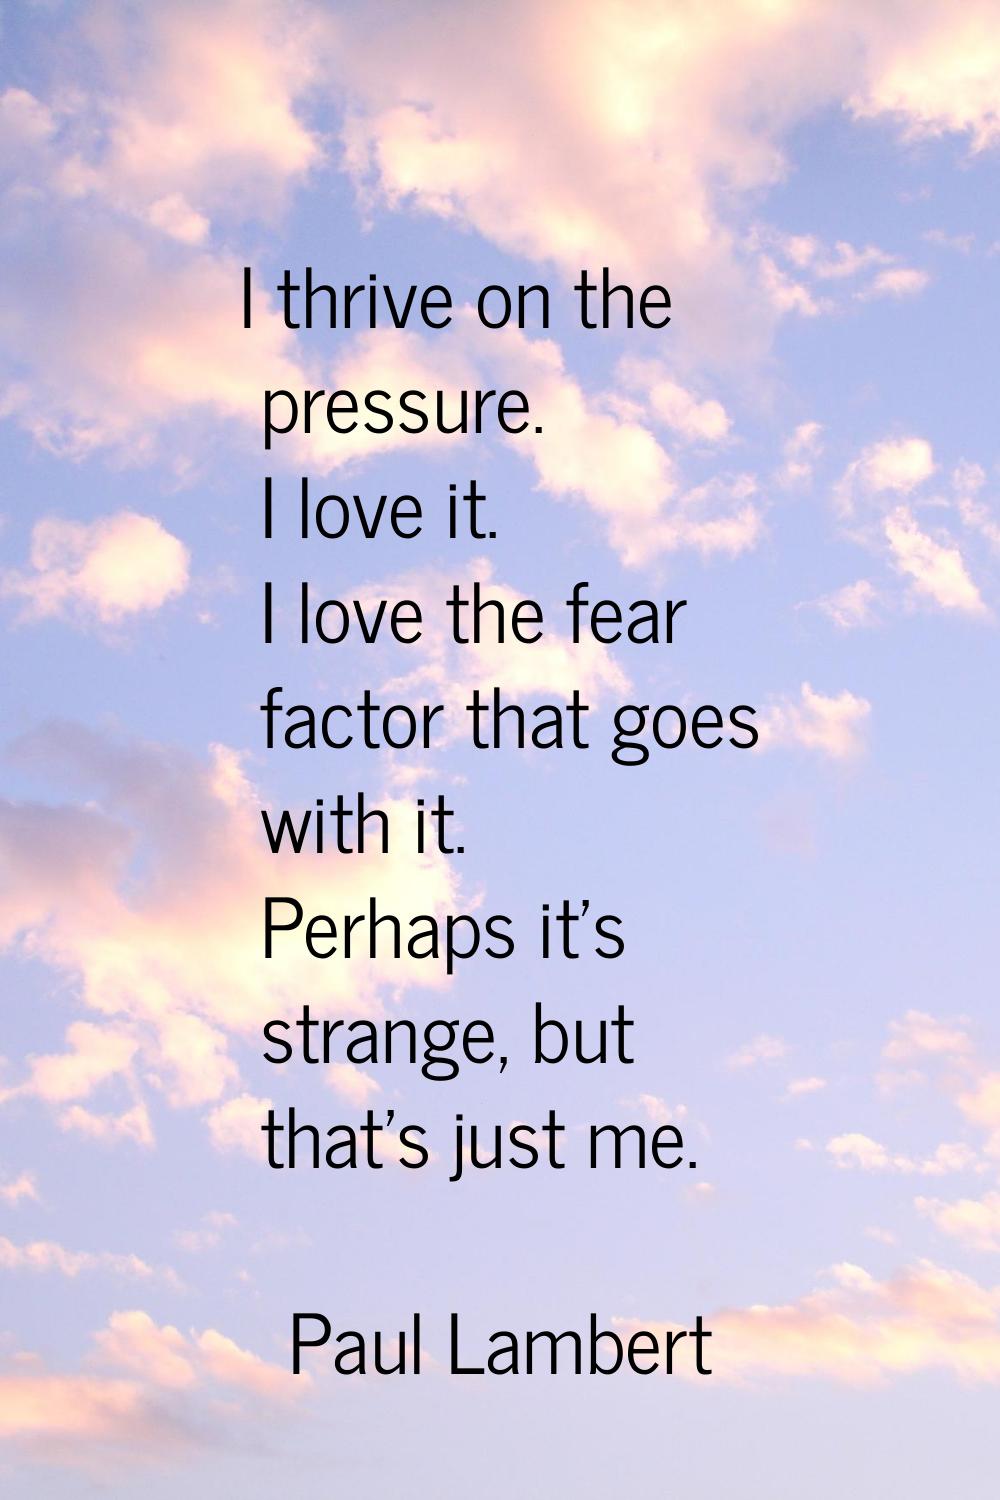 I thrive on the pressure. I love it. I love the fear factor that goes with it. Perhaps it's strange